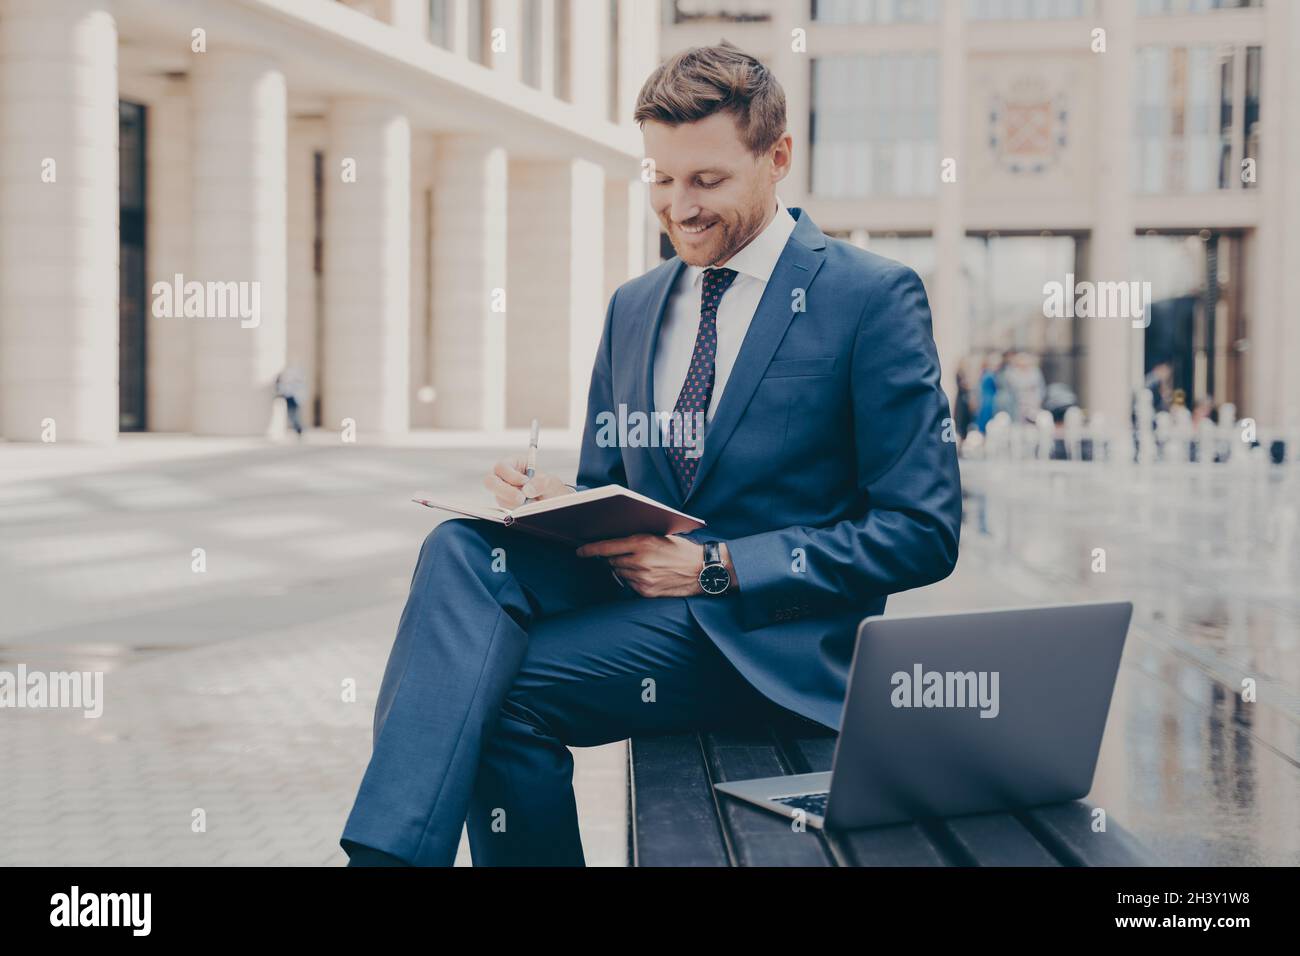 Successful business owner writing down information in notebook while working outdoors on weekend Stock Photo